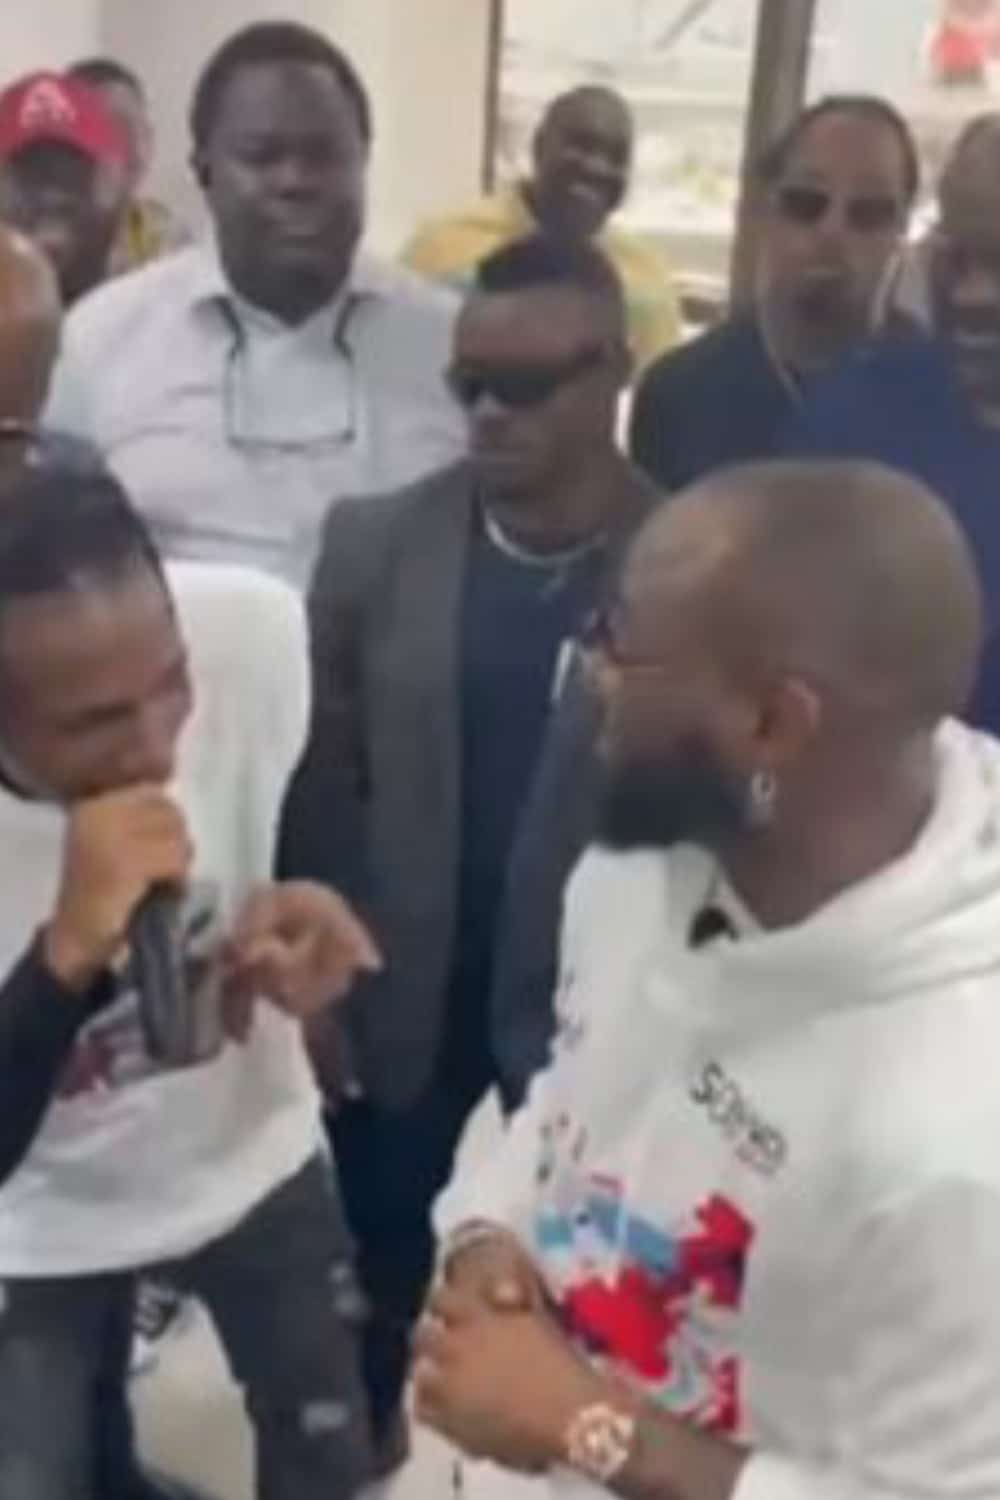 Up and coming singer impresses Davido with song at business event (Video)